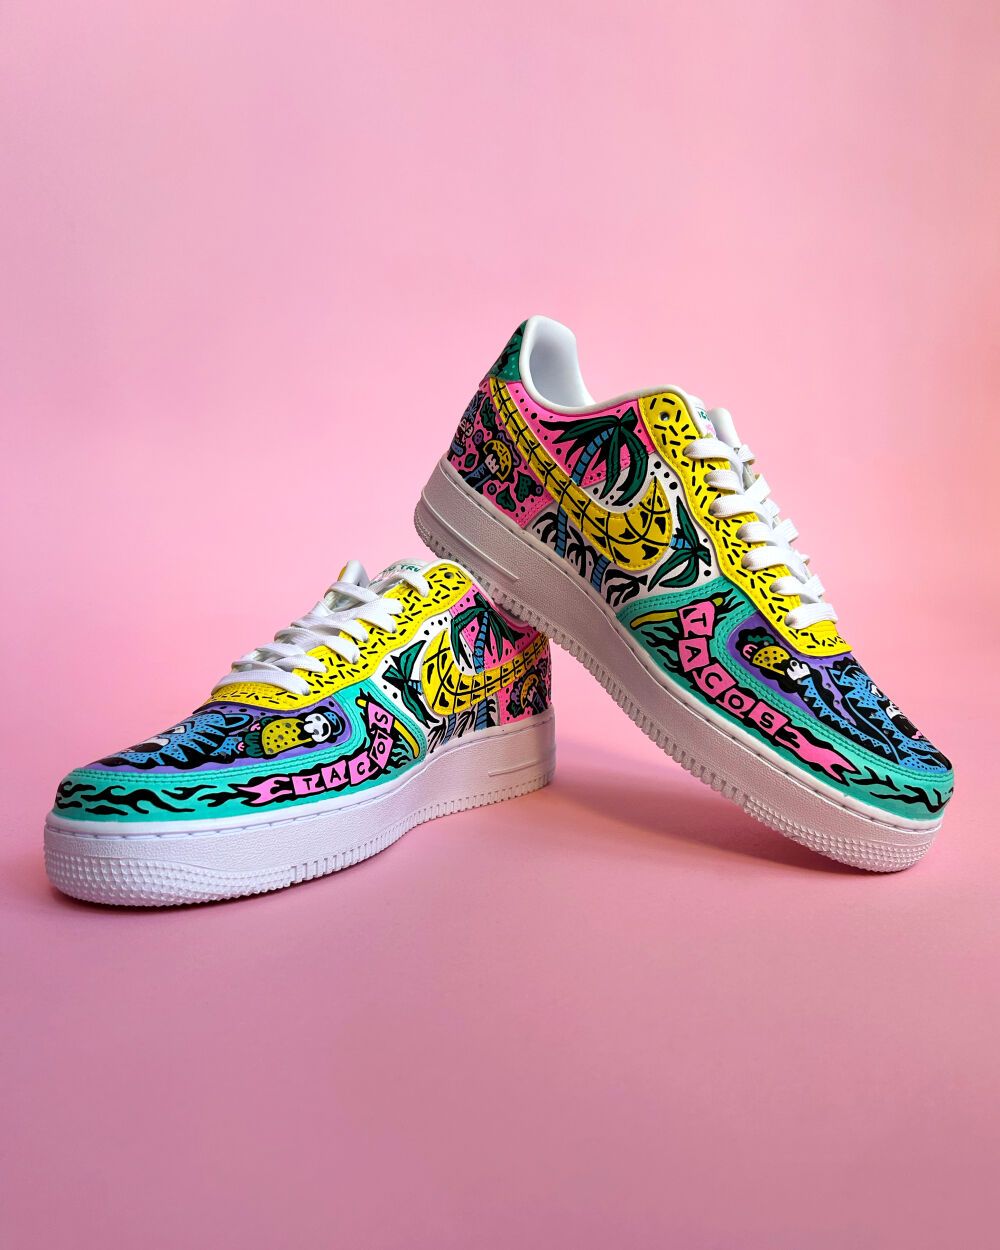 Hand painted custom made sneakers by Marc UÅ